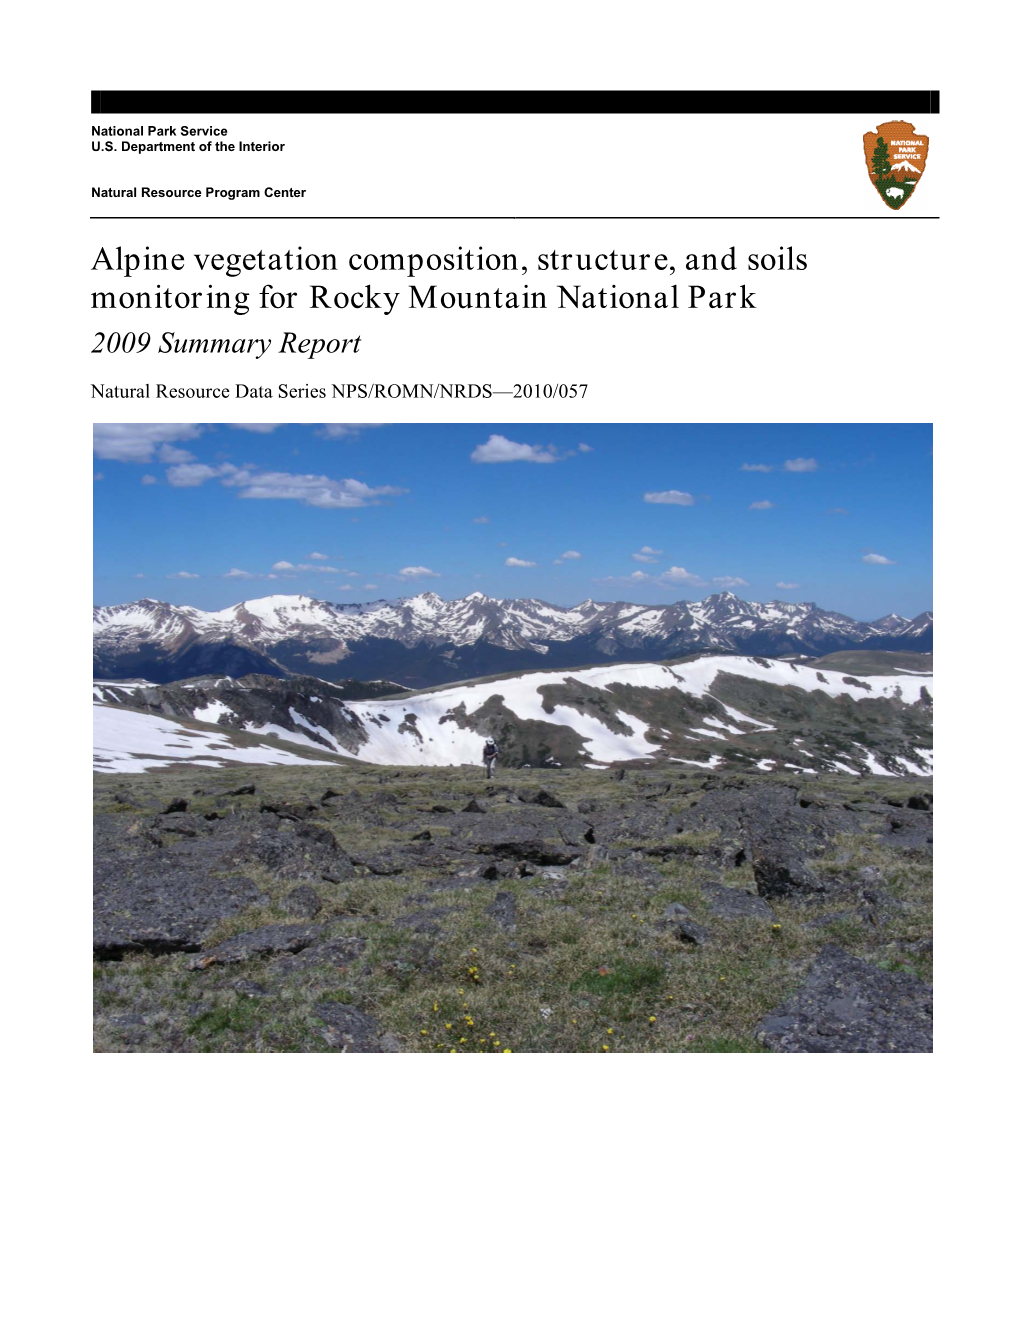 Alpine Vegetation Composition, Structure, and Soils Monitoring for Rocky Mountain National Park 2009 Summary Report